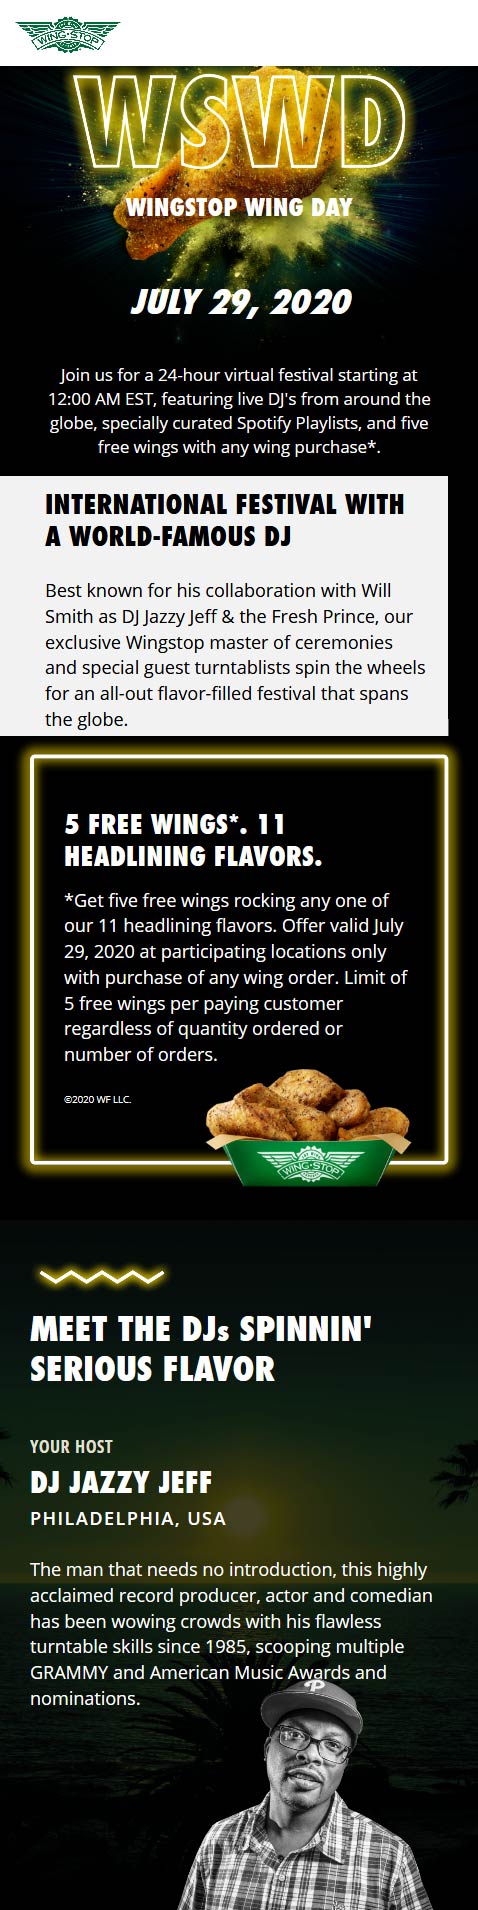 Wing Stop restaurants Coupon  5 free chicken wings with your order Wednesday at Wing Stop #wingstop wingstop wings chickenwings london chicken boxchevy foodporn food coachmanolo follow izuzuchihuahua 